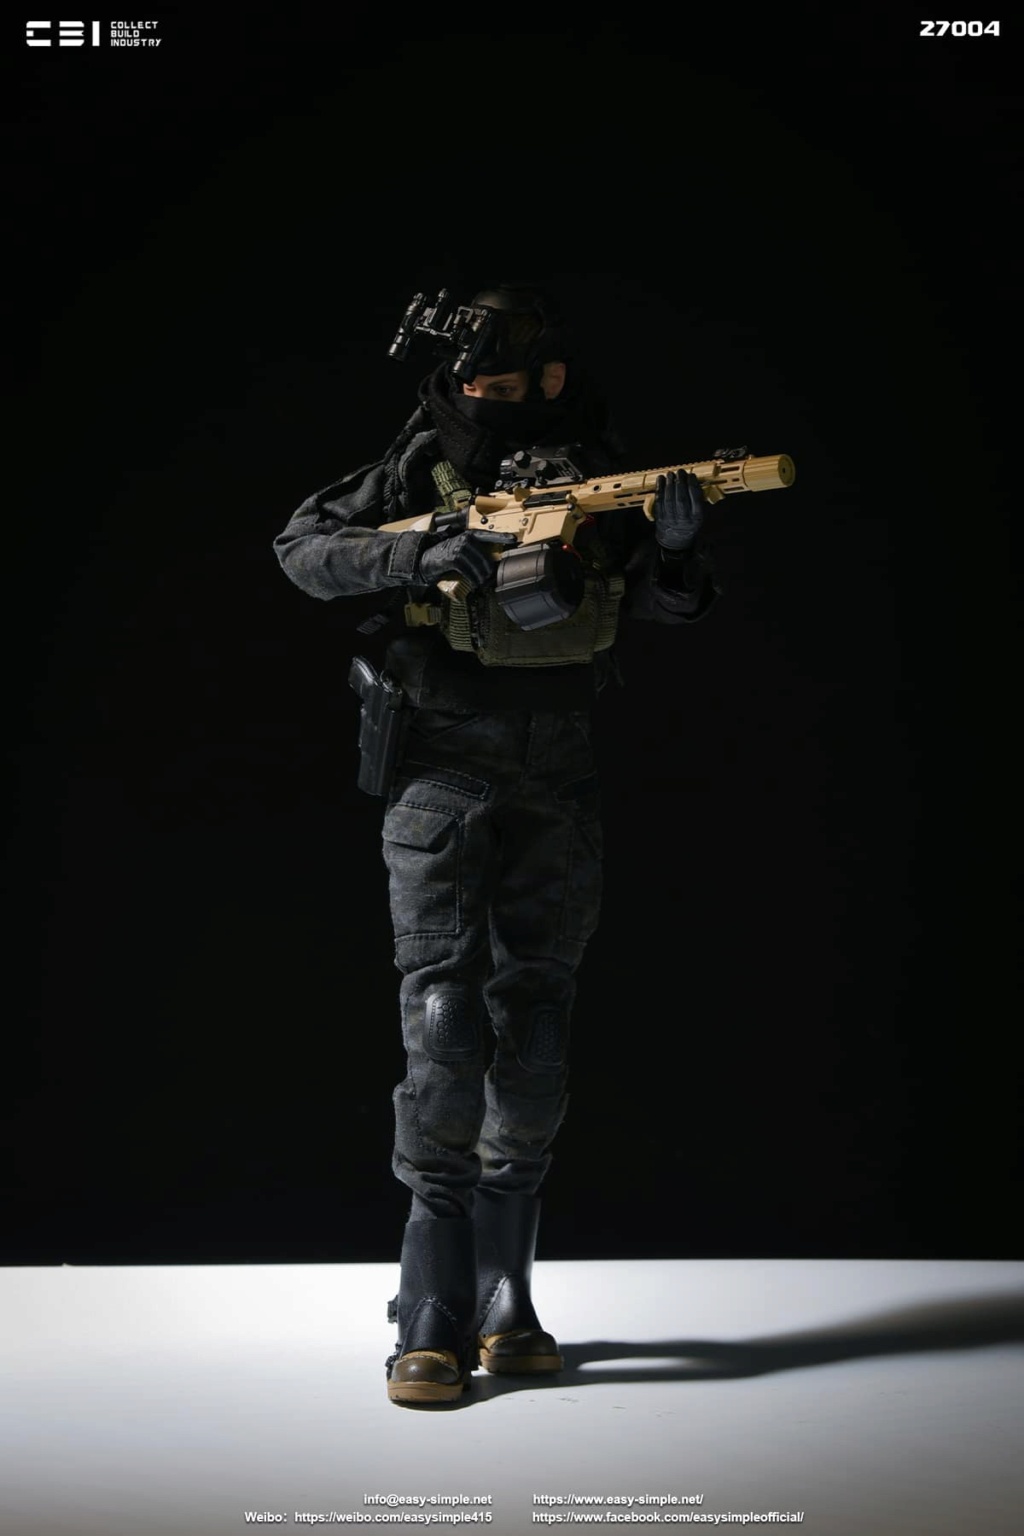 easy - NEW PRODUCT: CBI & Easy&Simple: 27004 1/6 ERICA STORM - TASK FORCE 58 CPO action figure 3770